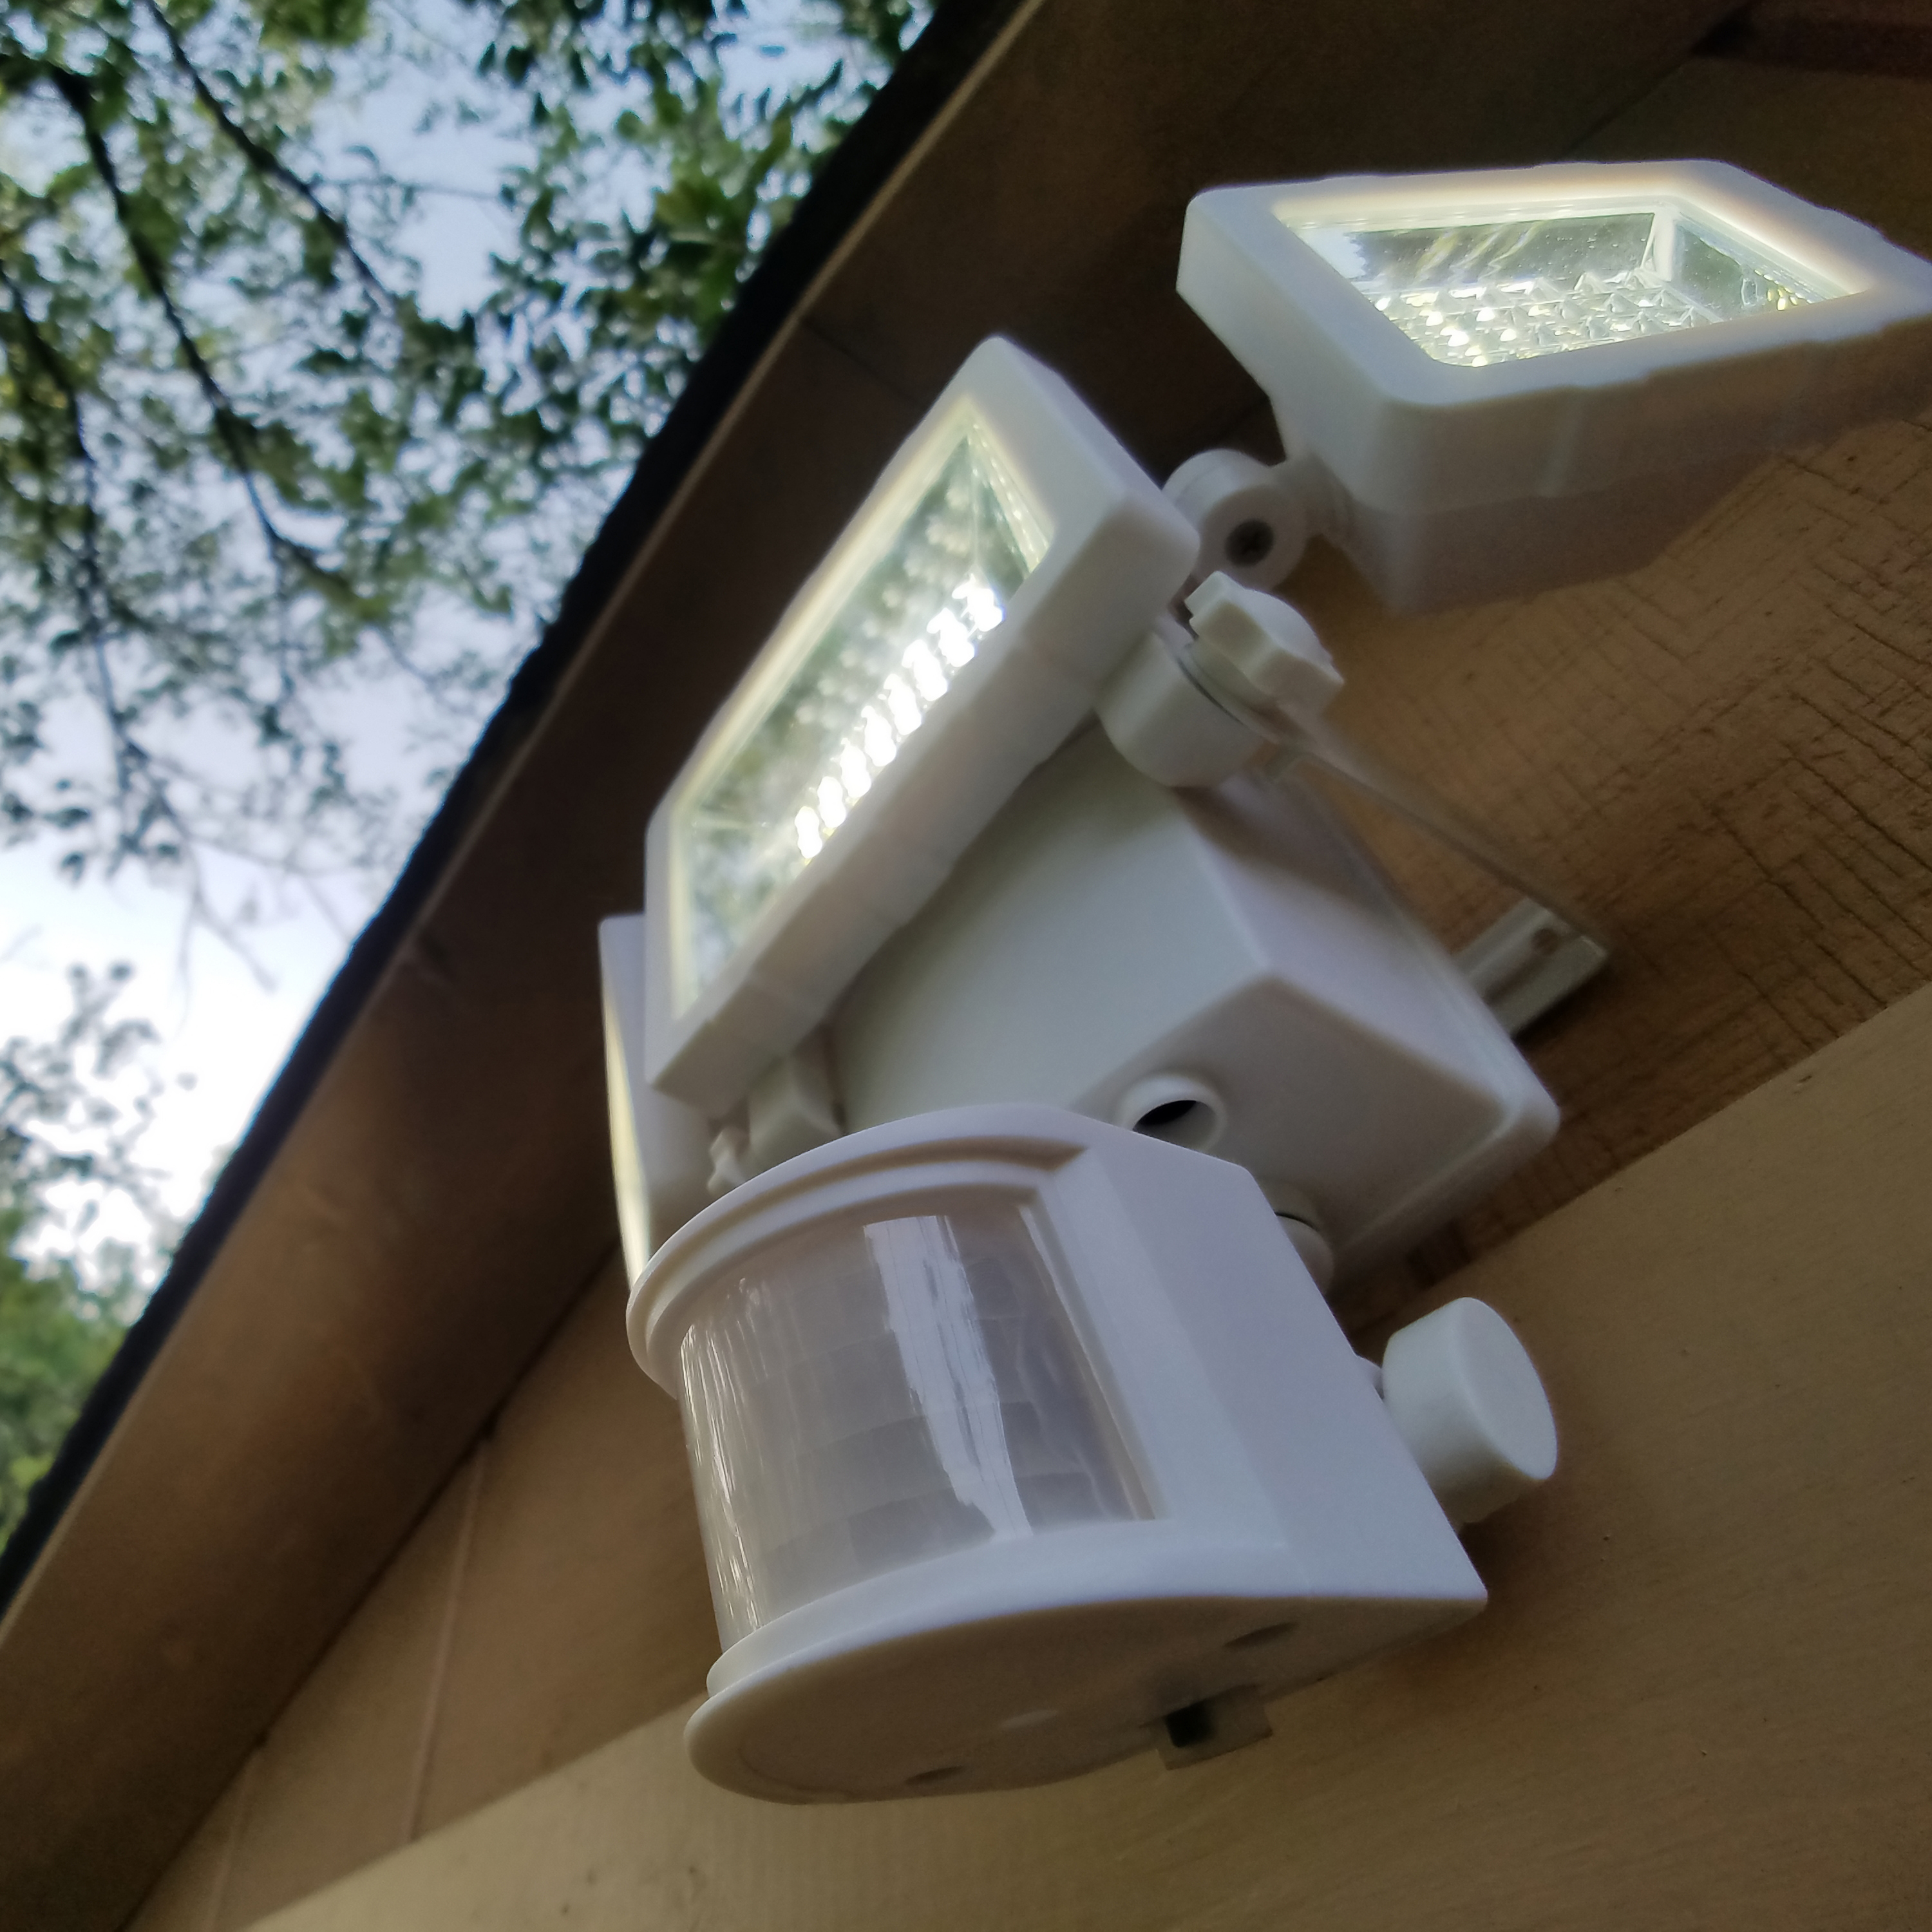 Westinghouse 2000 Lumen Triple Head Solar Security Light, Motion Activated (White Finish) - image 6 of 7